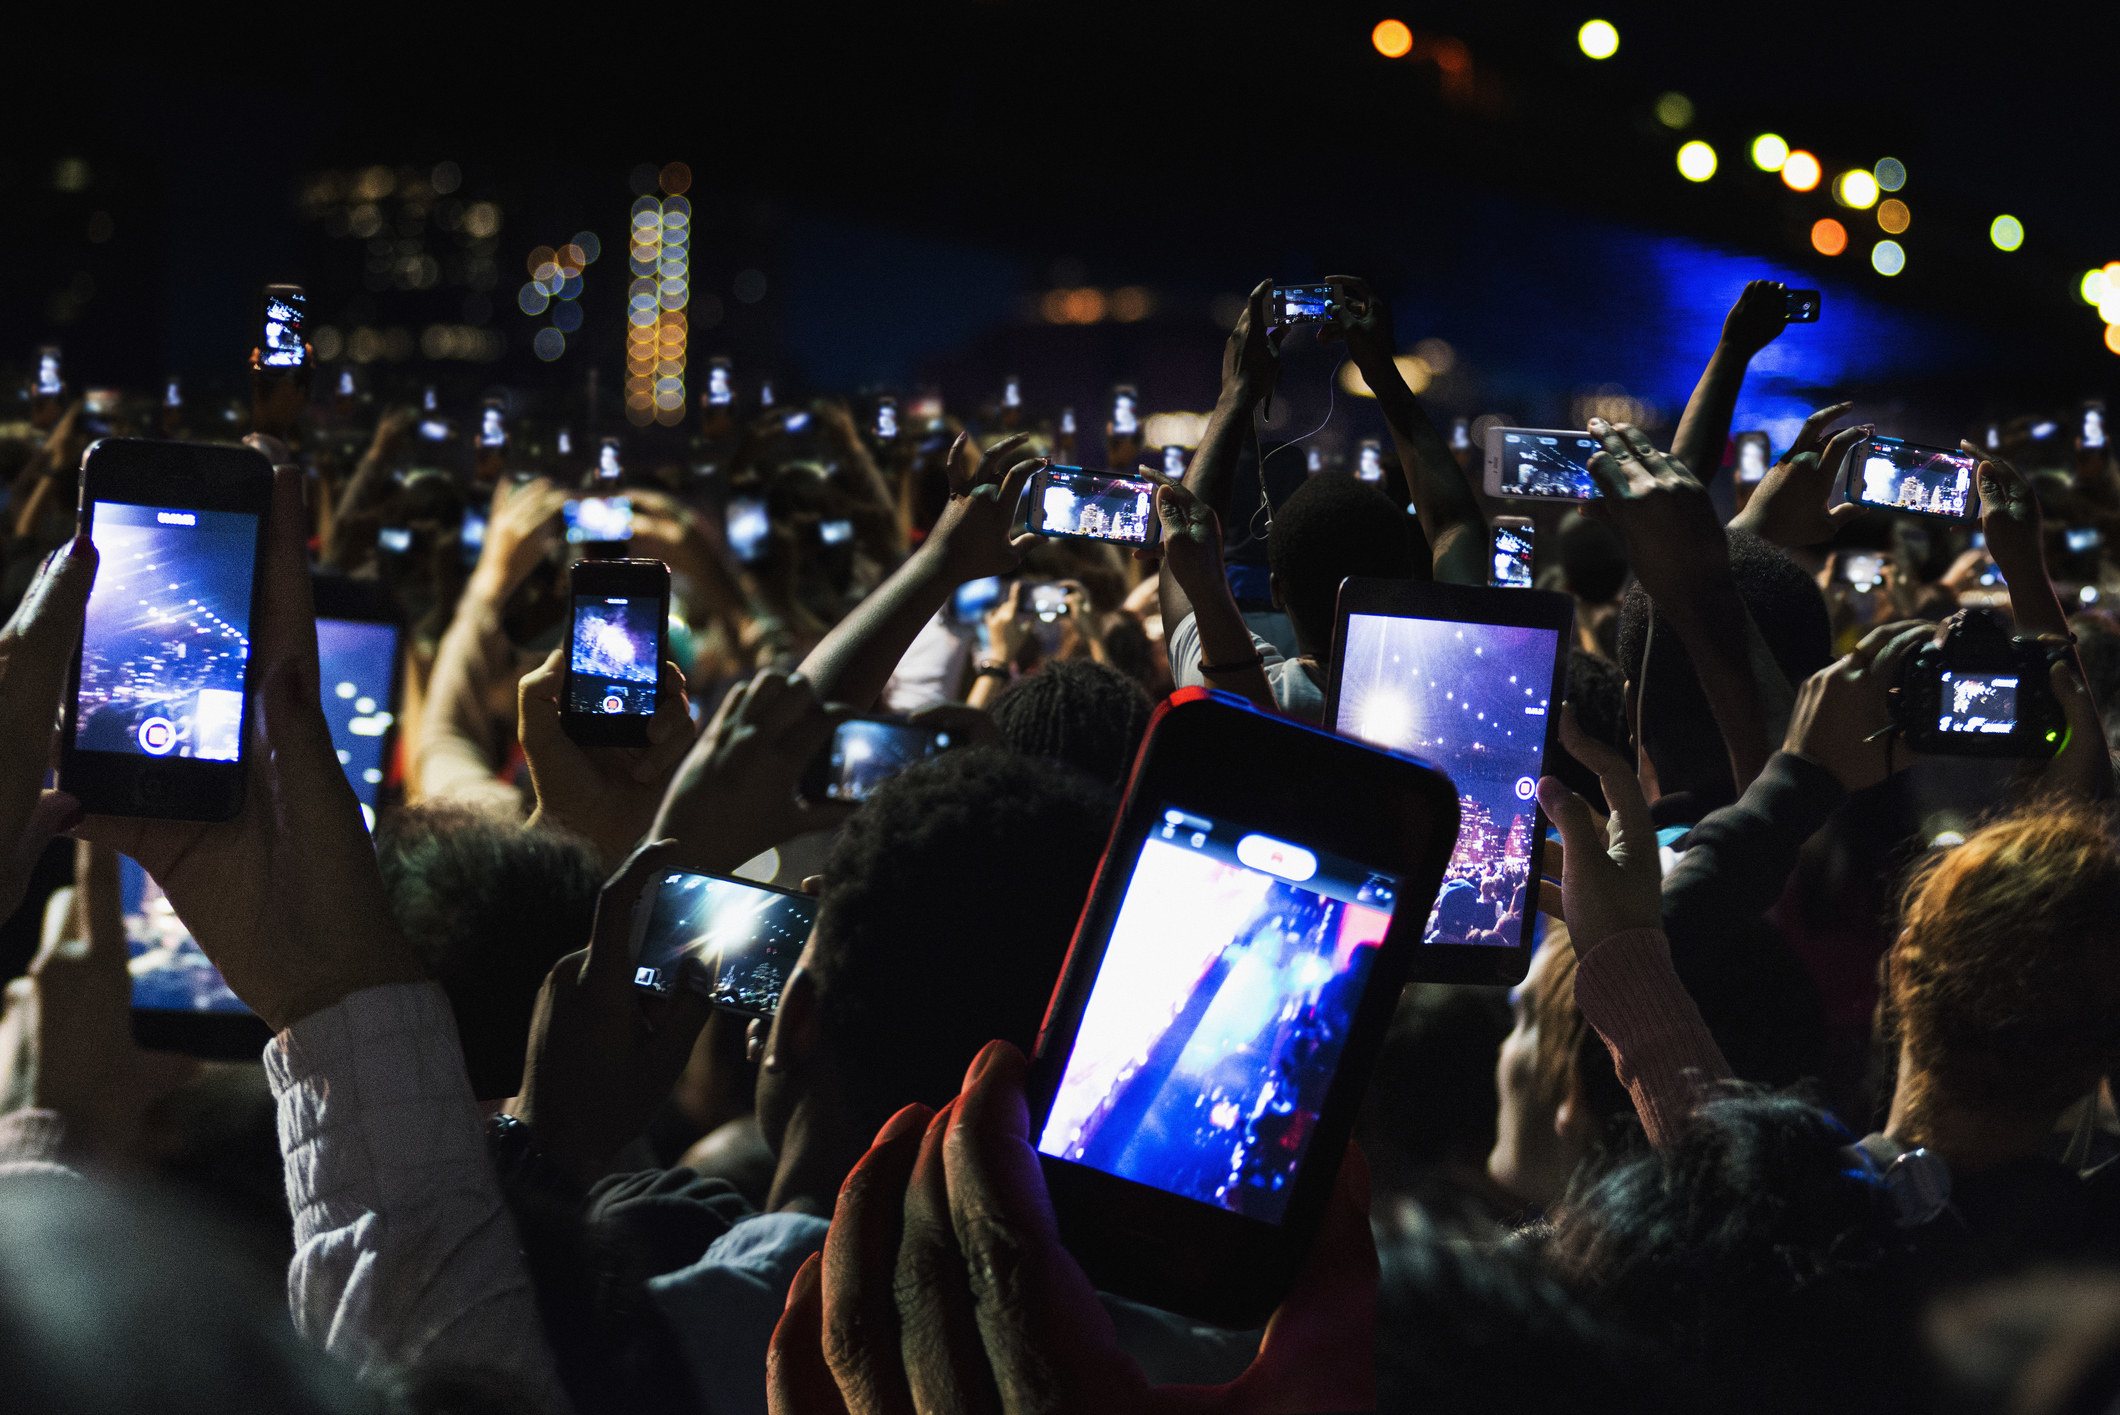 People at a concert with their phones out